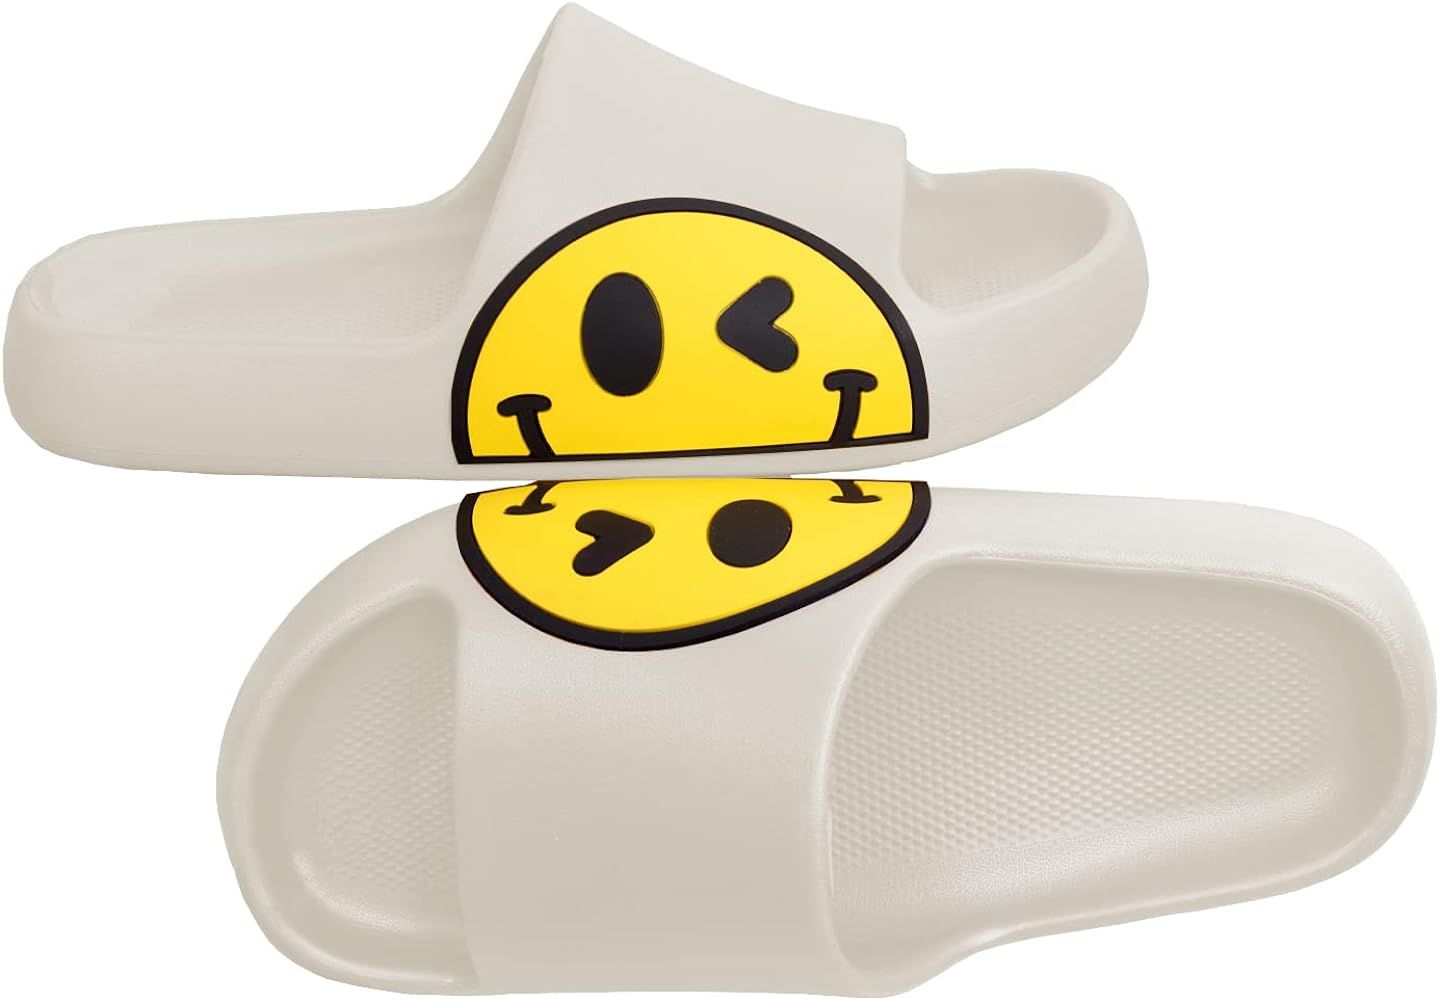 Smiley Face Slippers Sandals for Women and Men, Anti-Slip Indoor Slippers Bathroom Shower Sandals, O | Amazon (US)